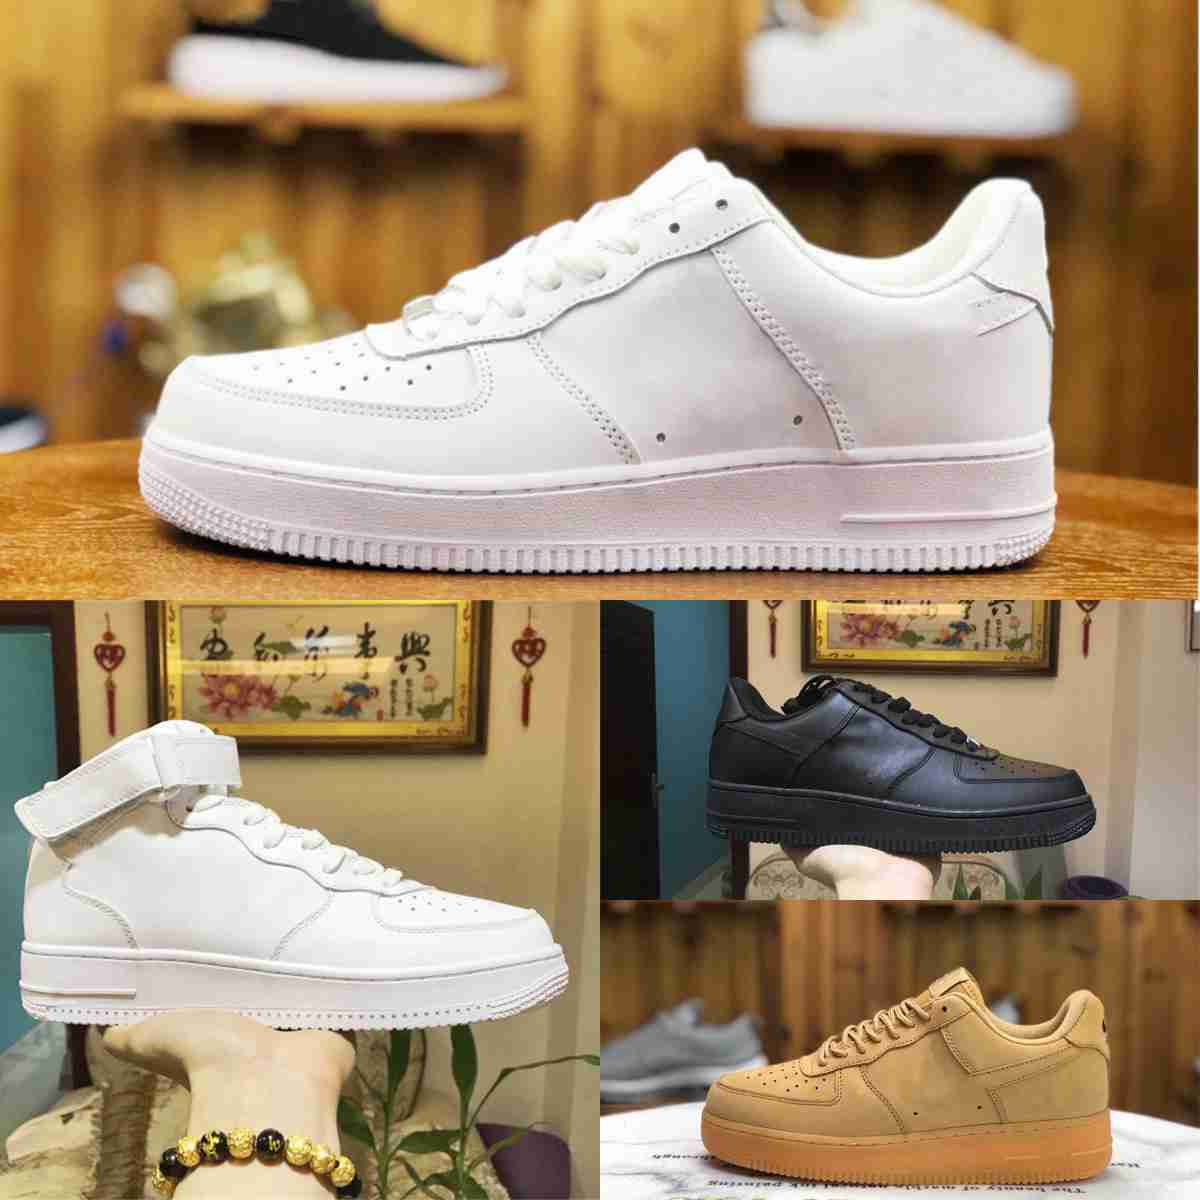 

Trainers AirforCes 1 Classic Sports Shoes One Skateboarding Retros Triple White Black Wheat Airs High Outdoor Runner Low Cut ForCes 1s 07 Original Jogging Sneakers, Please contact us